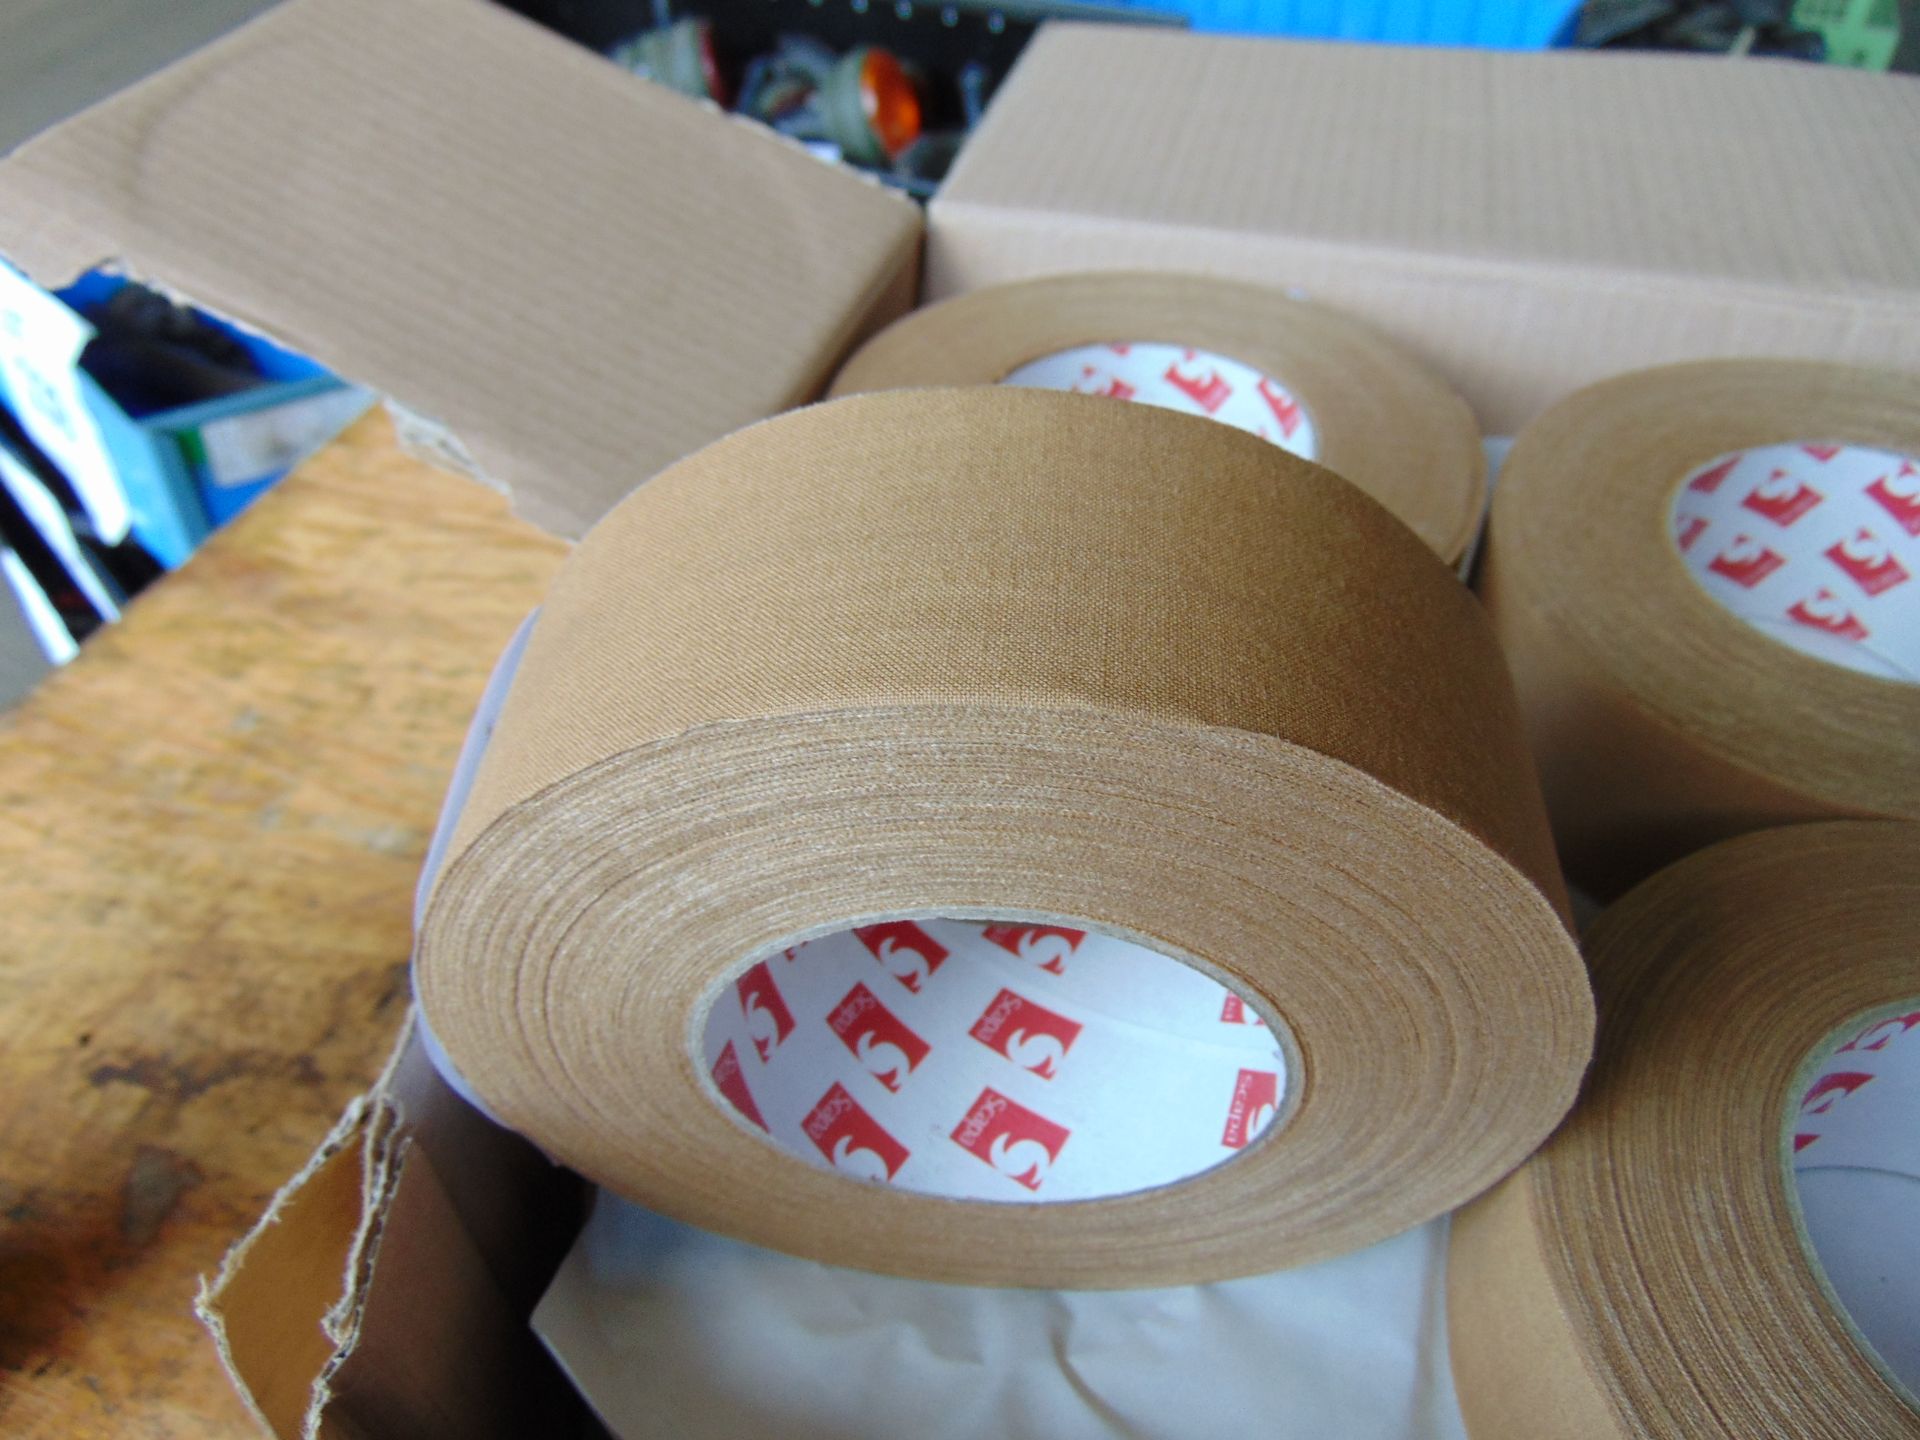 New Unissued 16 Rolls Scapa Tape Butt Linen 50mm x 50m / Roll Cloth Tape Adessive - Image 3 of 4